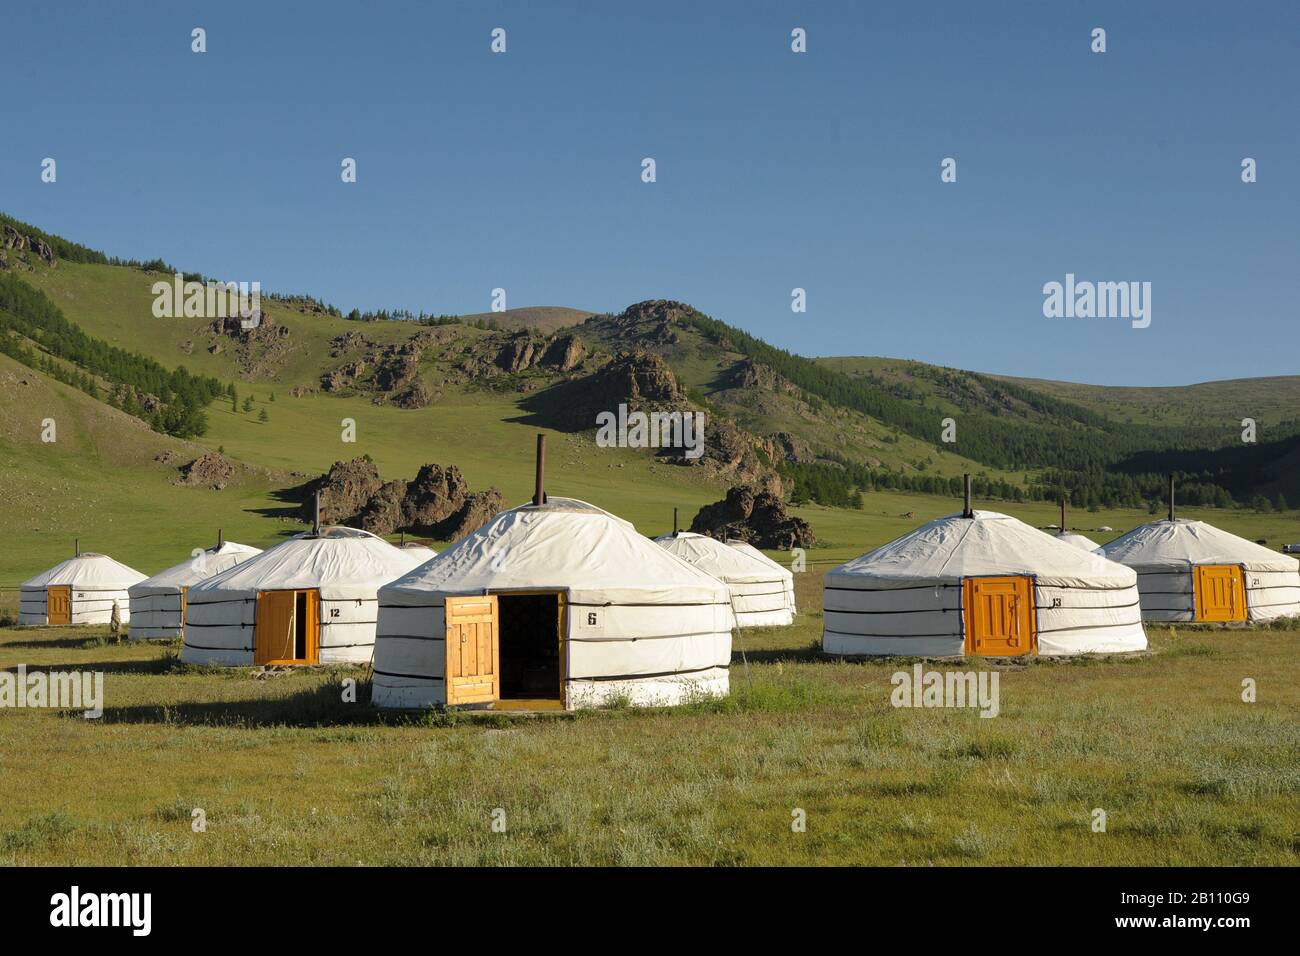 Ger-Camp in der Mongolei Stock Photo